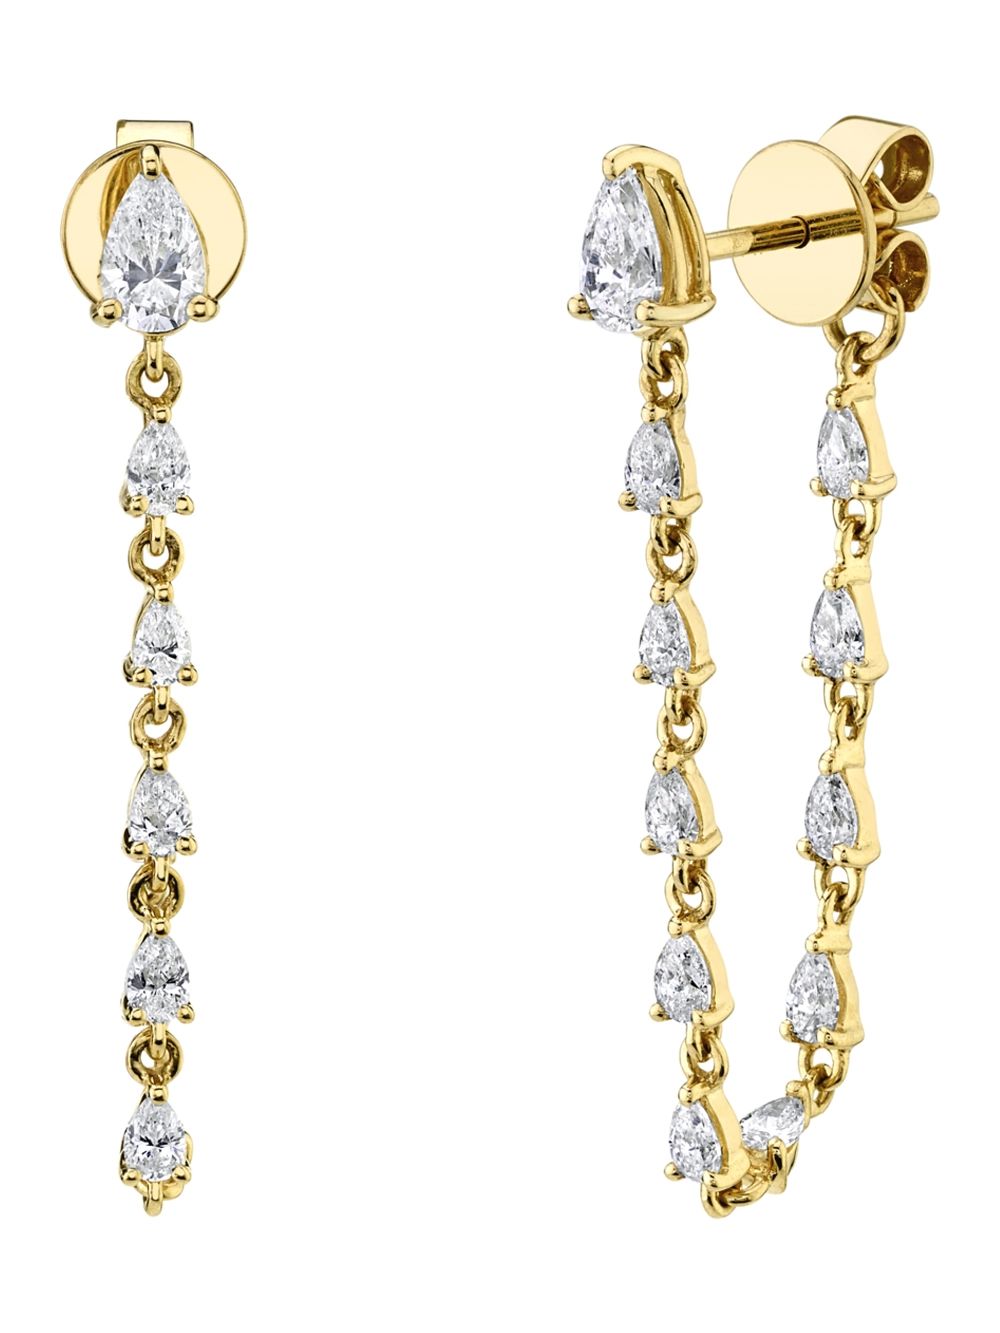 18k Yellow Gold All Pear Diamond Loop Earrings  | The Webster | The Webster